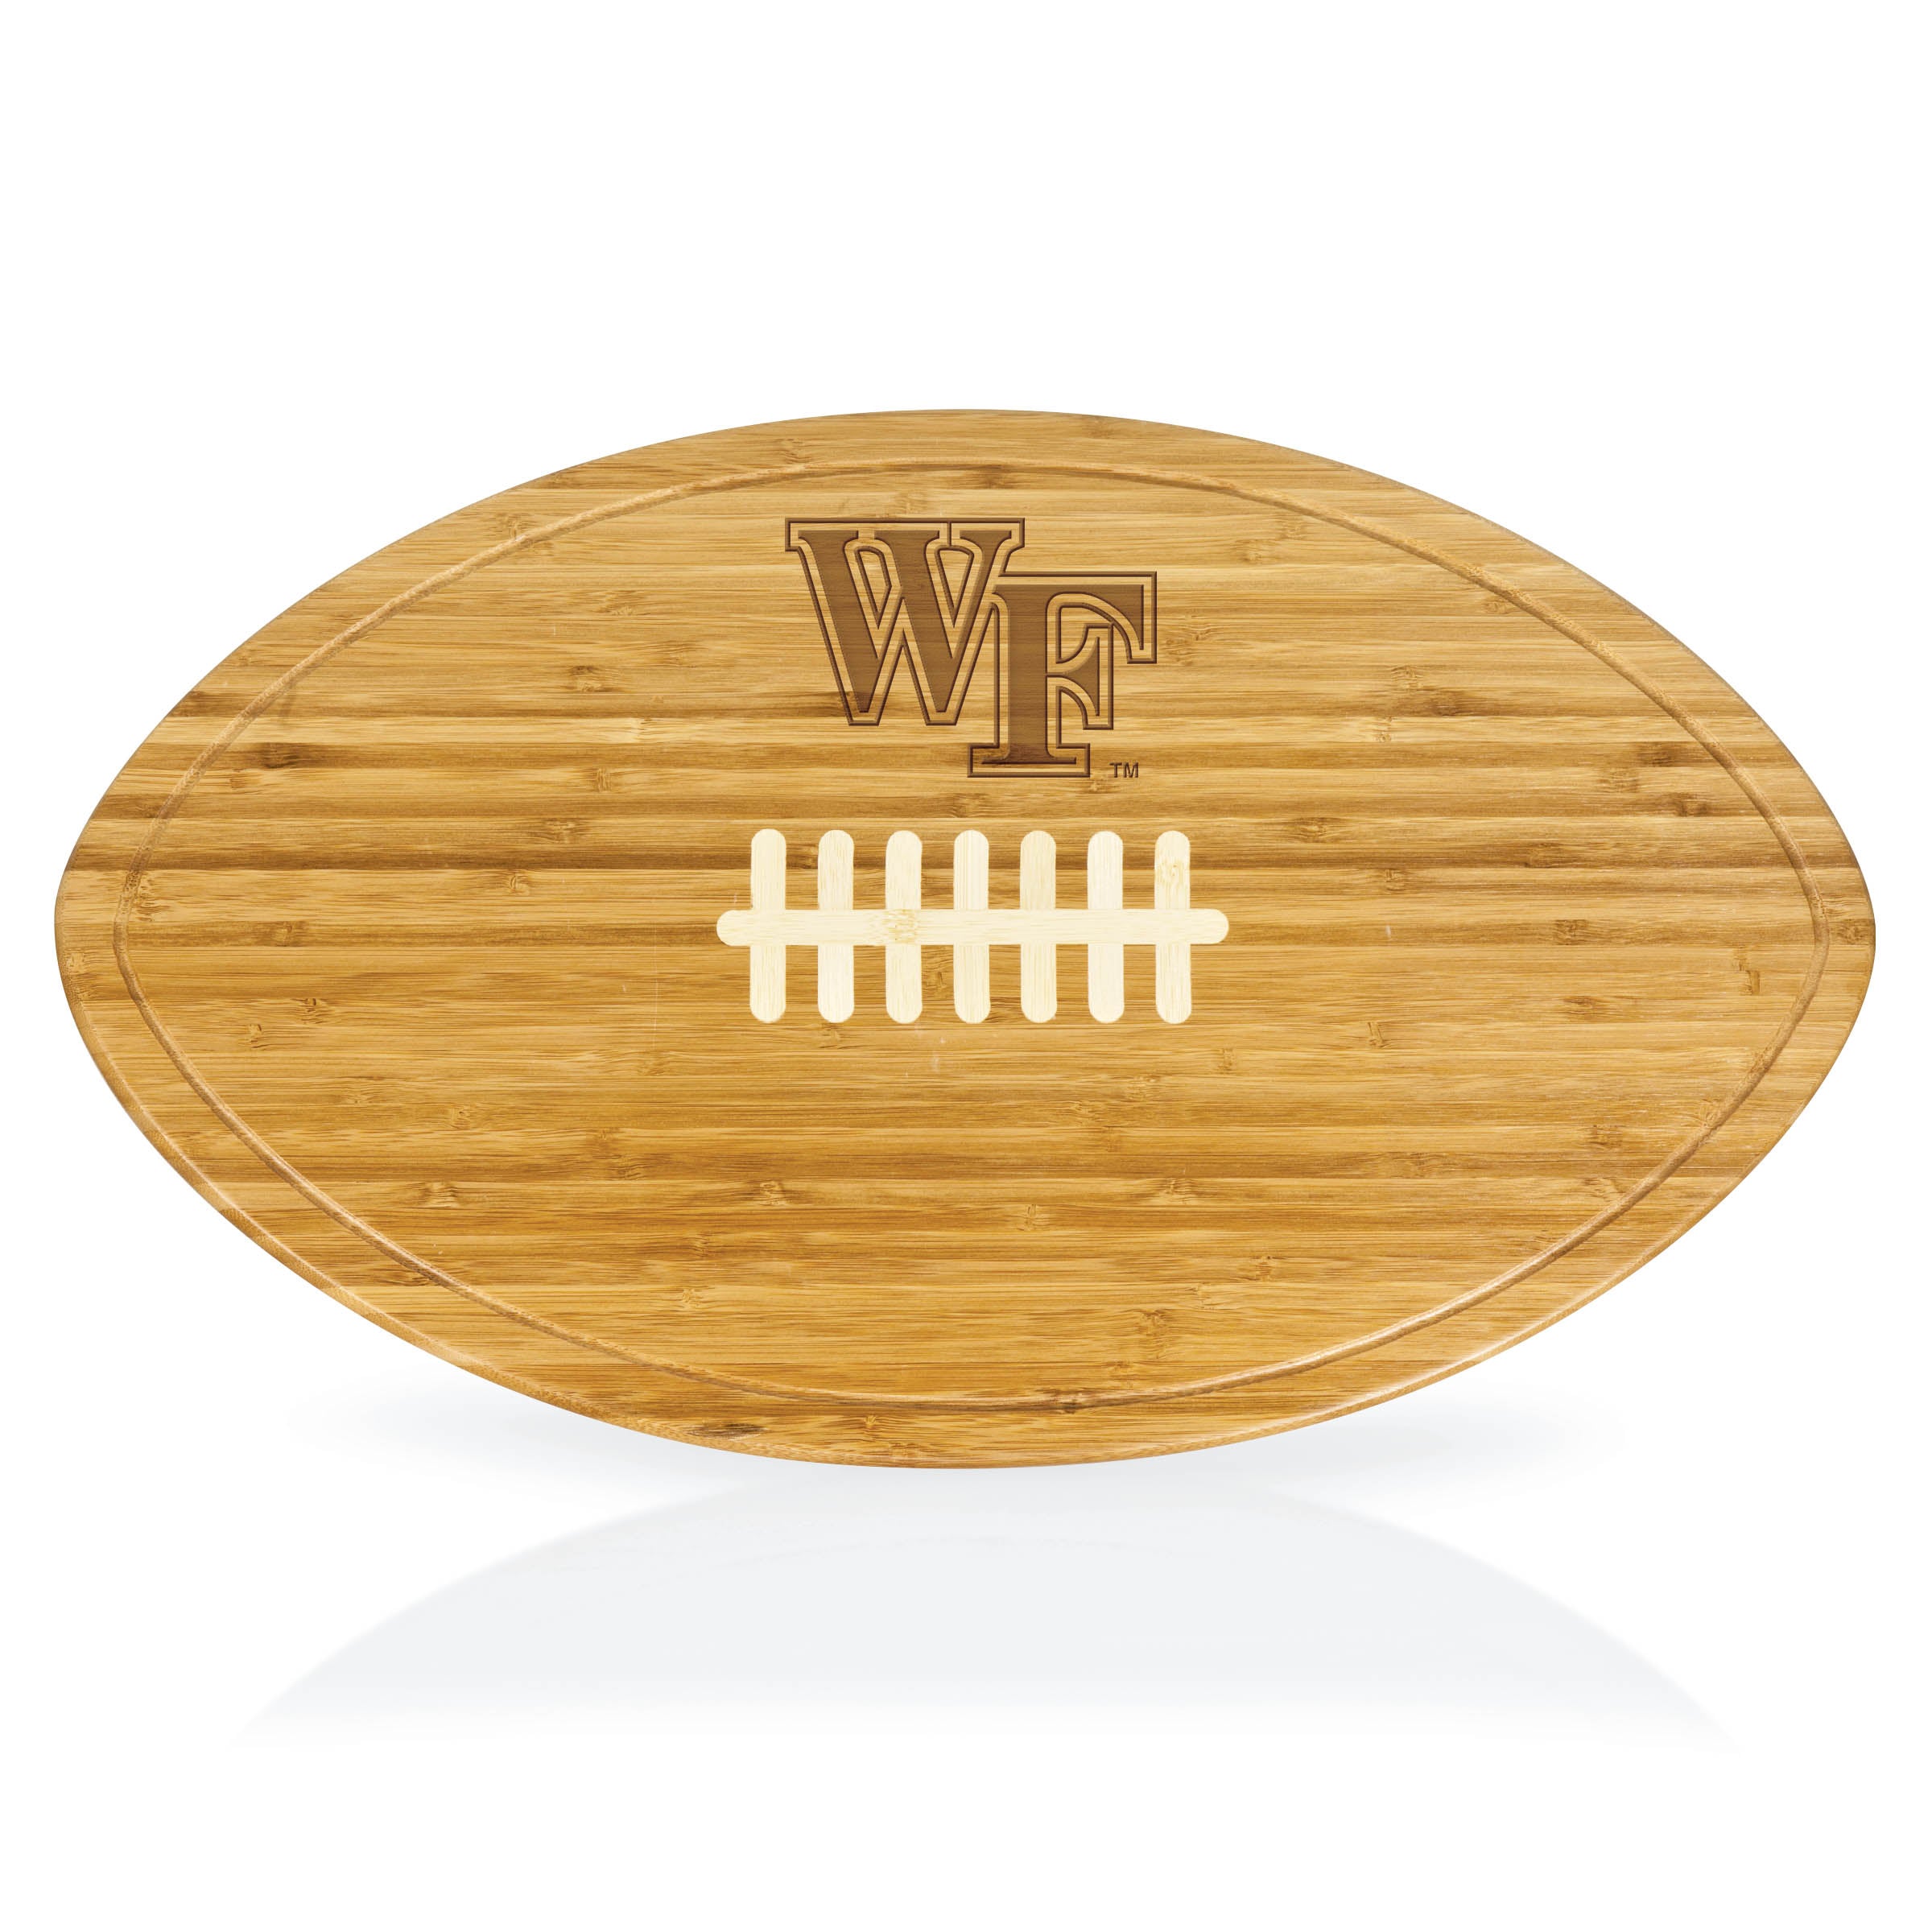 Wake Forest Demon Deacons - Kickoff Football Cutting Board & Serving Tray